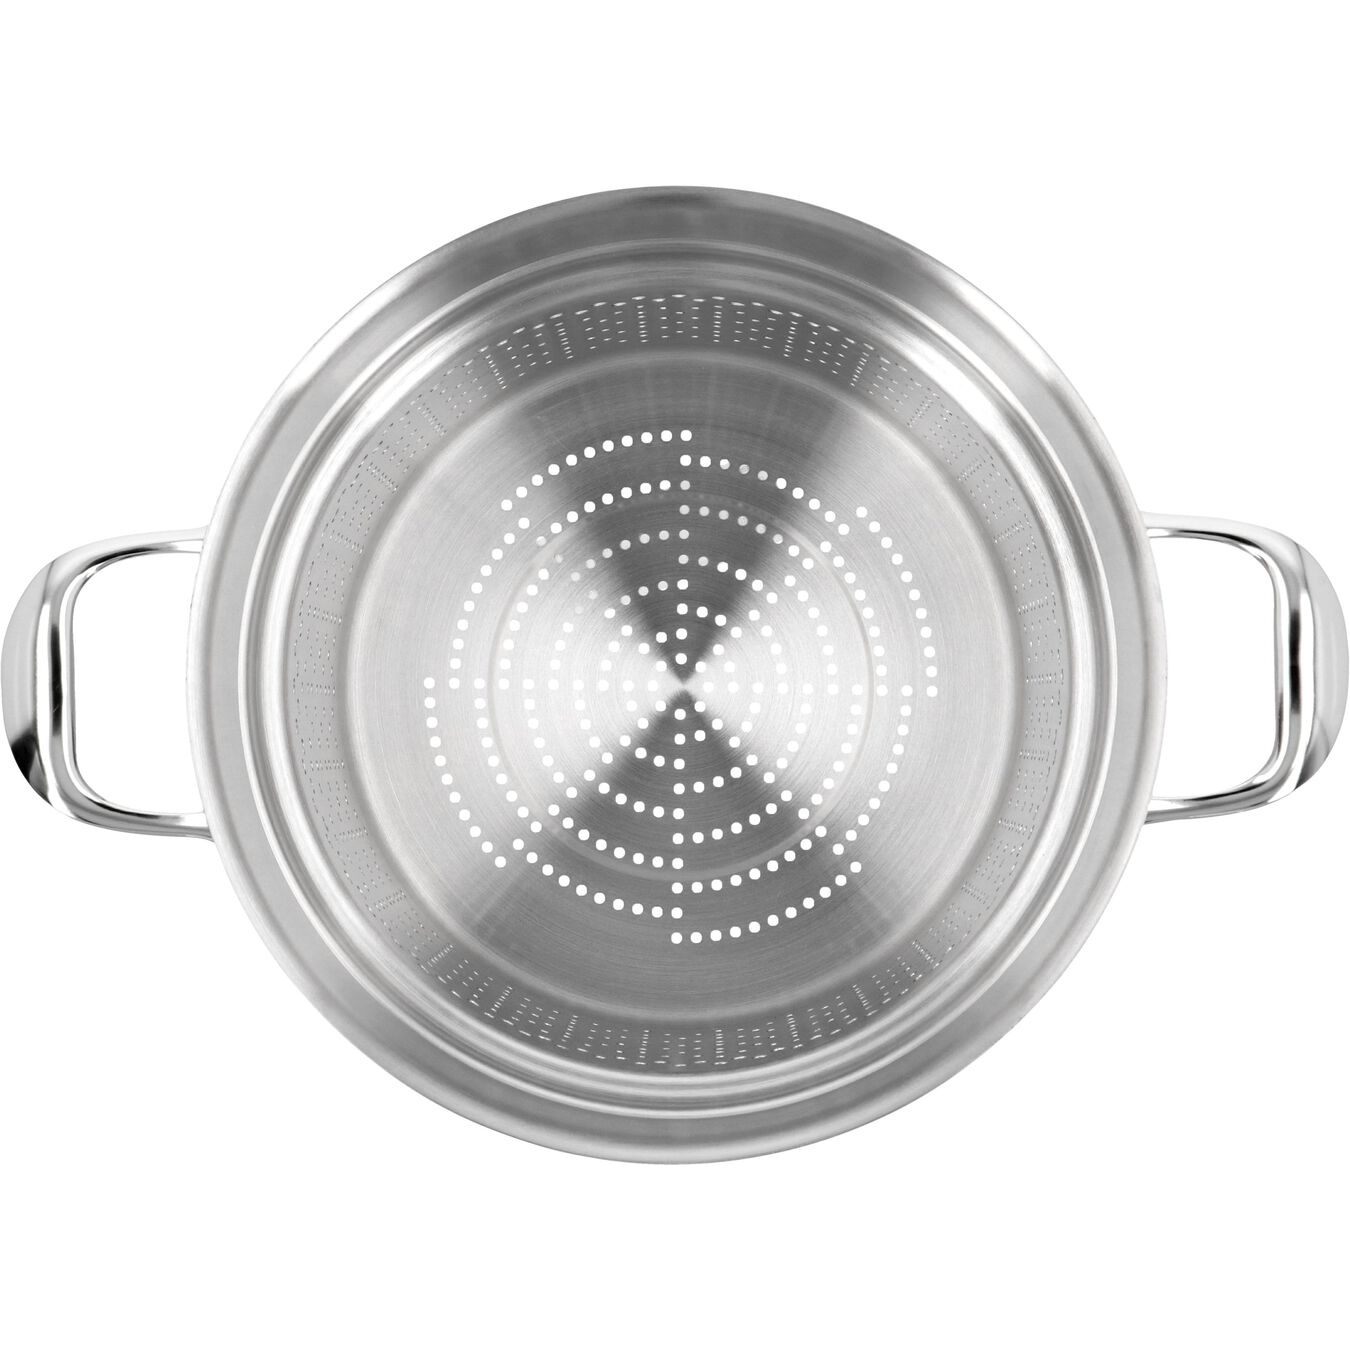 8.5 qt Pasta insert, 18/10 Stainless Steel ,,large 2